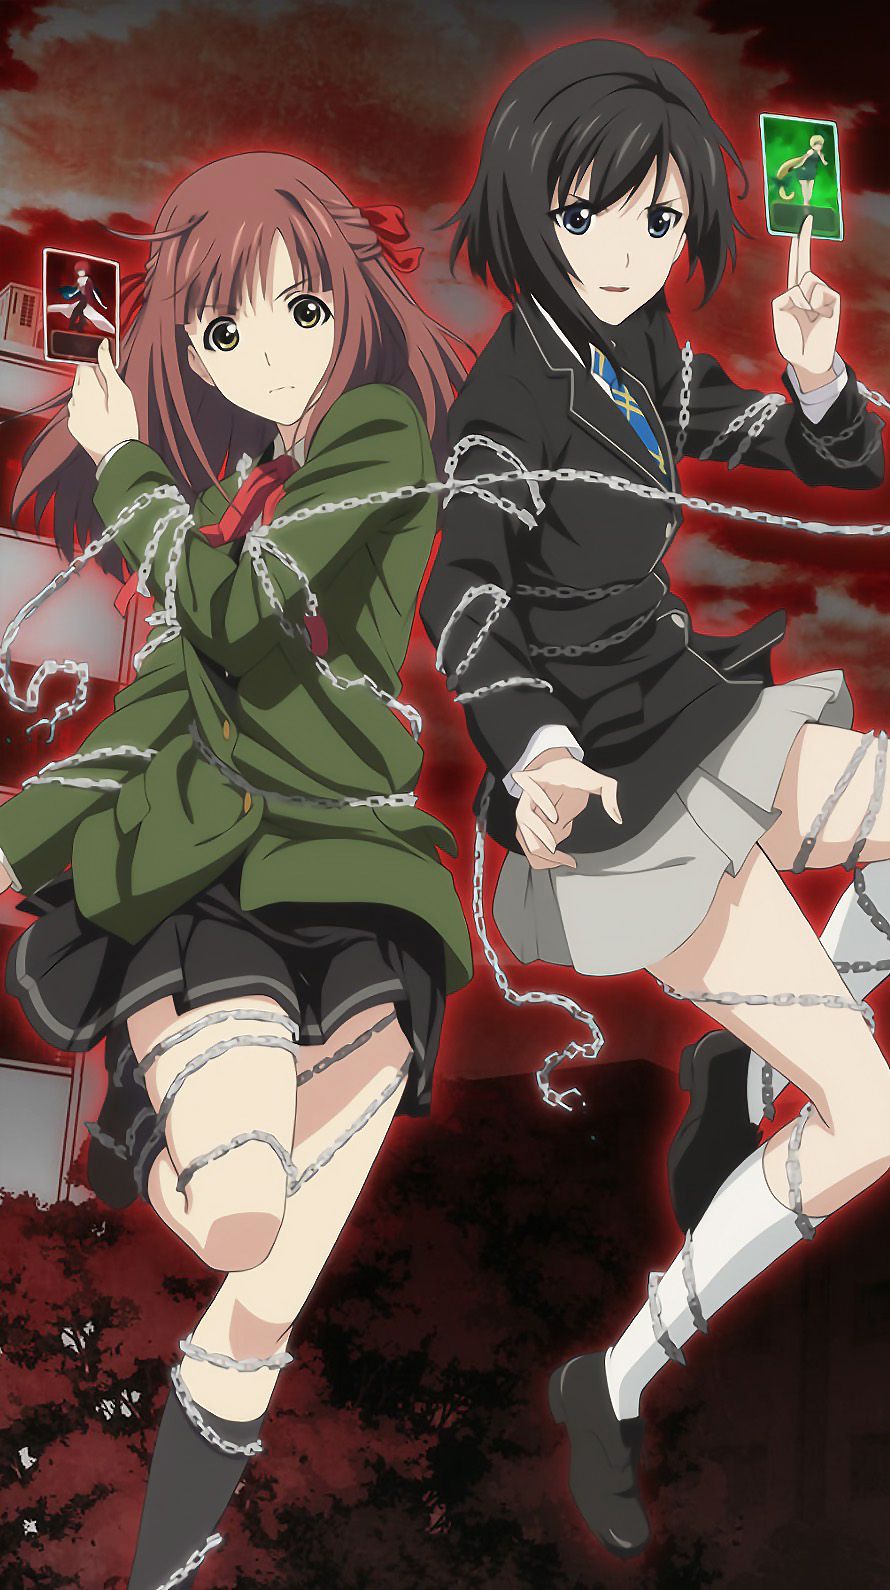 Lostorage Incited Wixoss Iphone壁紙画像 Androidスマホ壁紙 2 Iphone6 Iphone5s アニメ 壁紙ネット Pc Android Iphone壁紙 画像